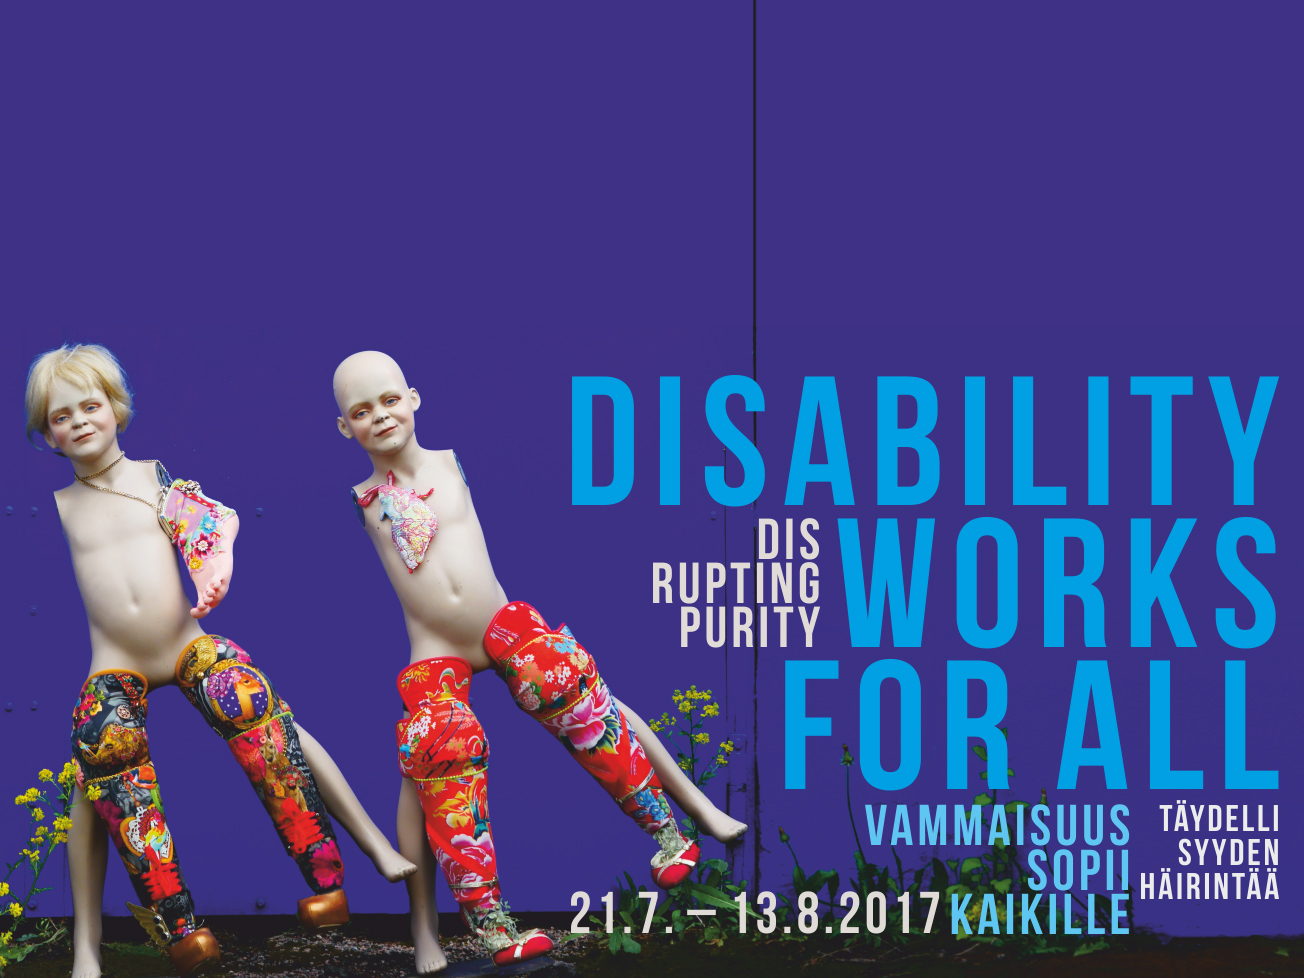 Disability Works for All - Disrupting purity